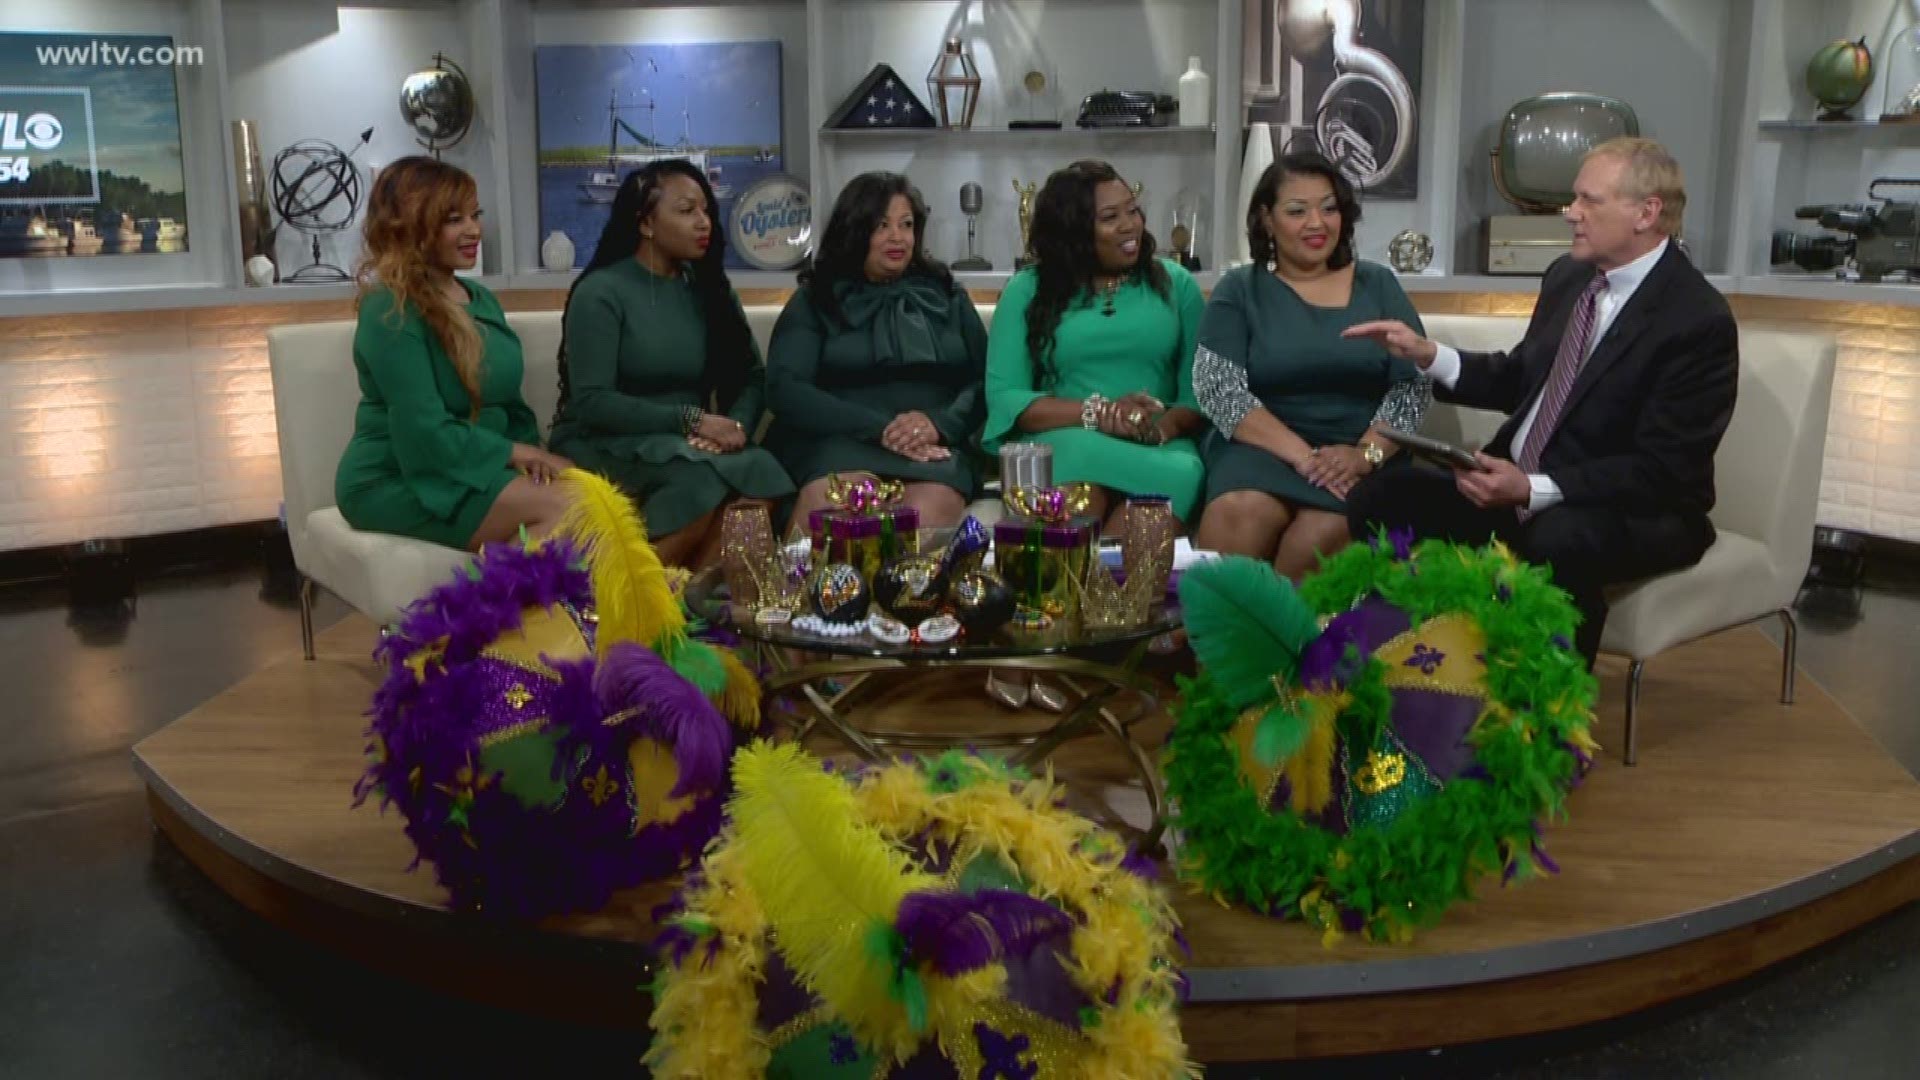 Eric sits down with the DeCou sisters to talk about their gameshow experience and how they represented New Orleans in style.